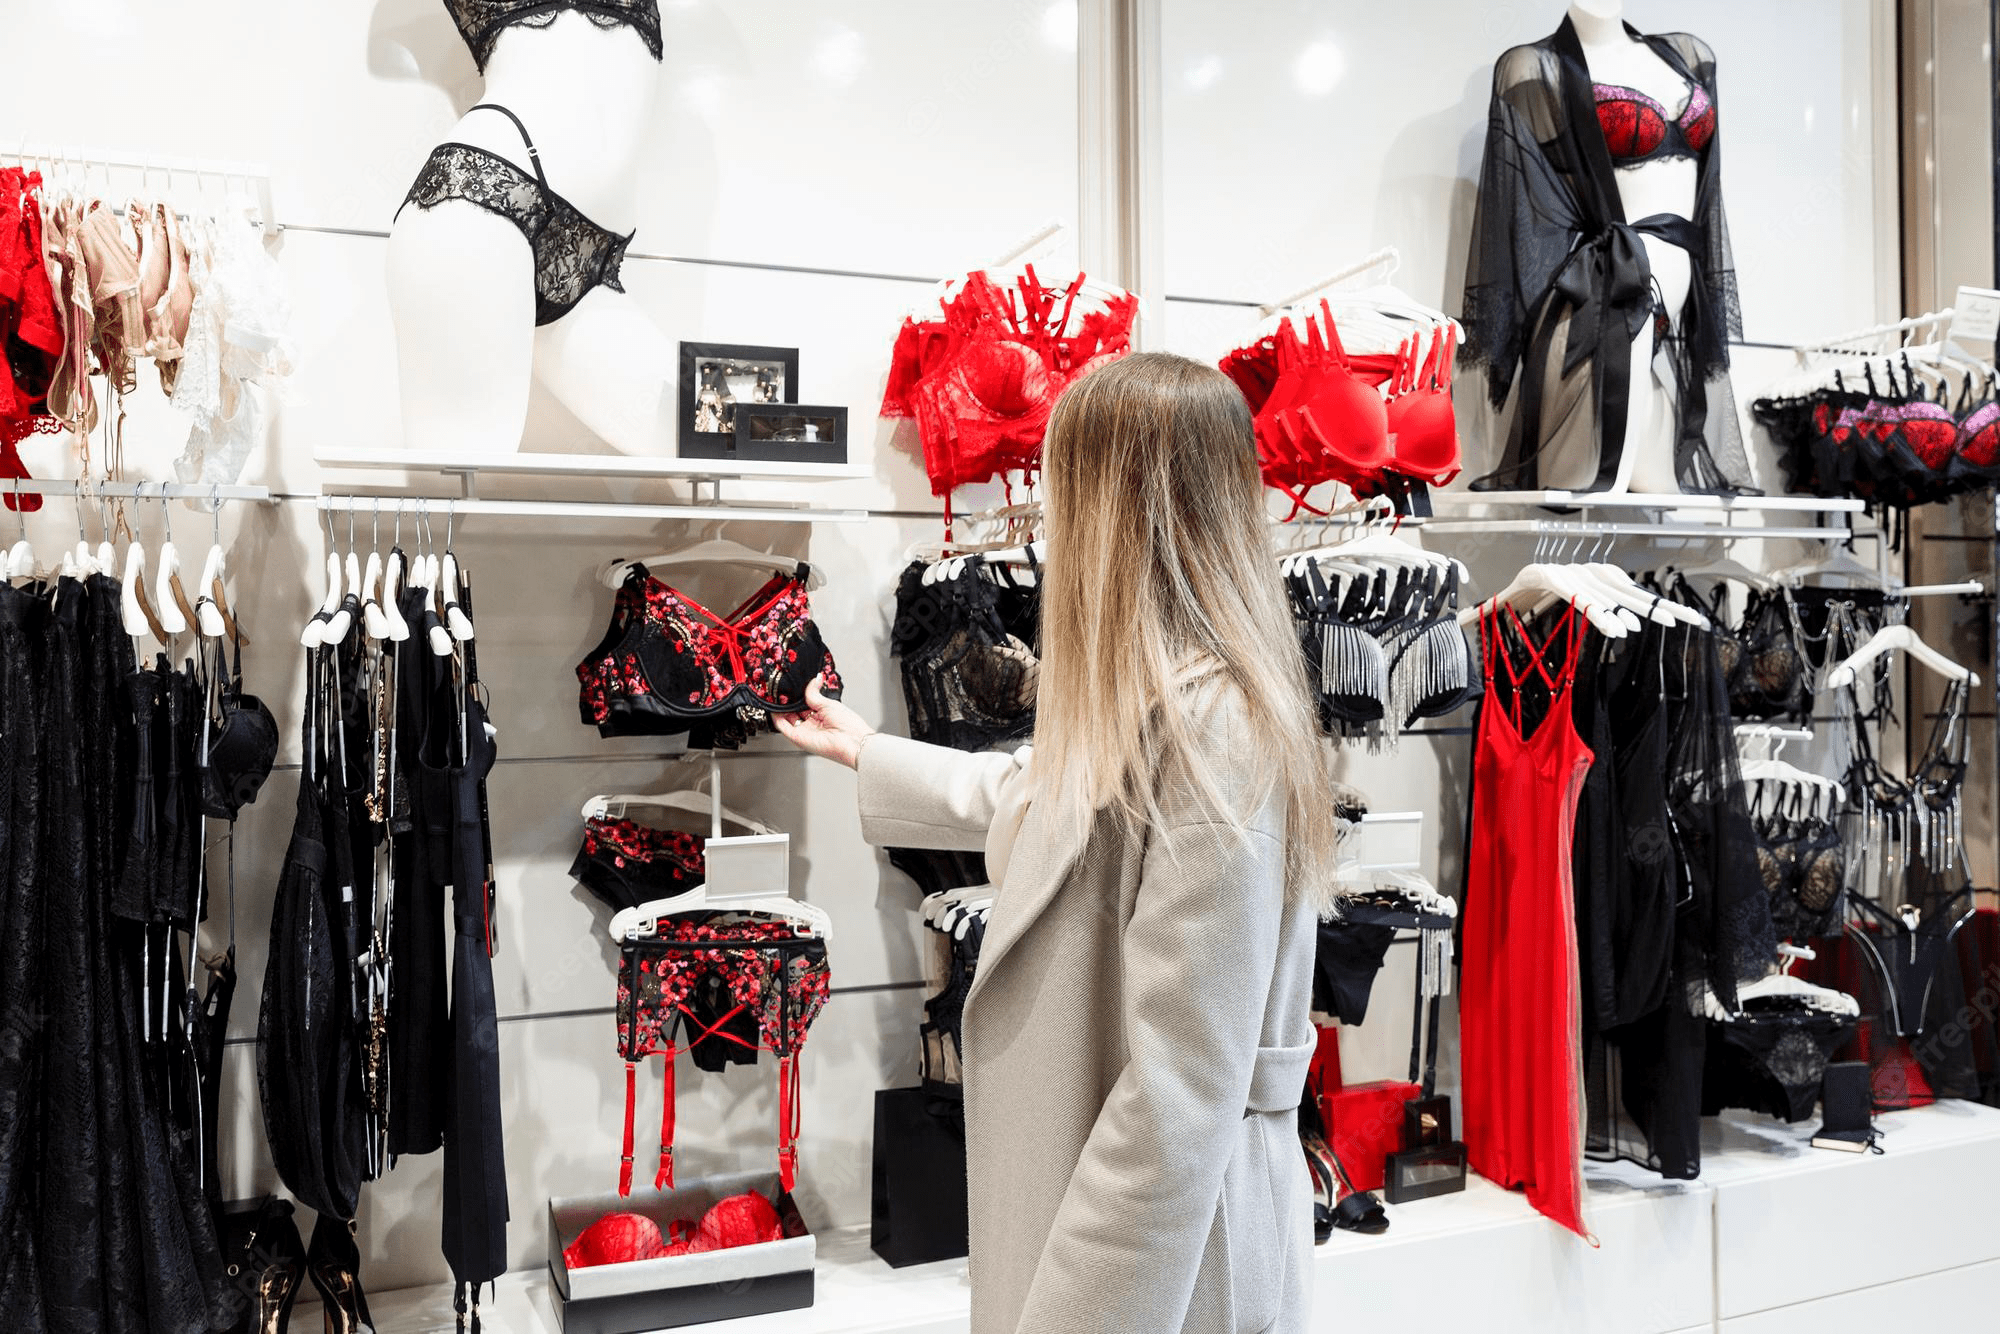 Luxury Lingerie Brand Coco de Mer Is Bringing People Together